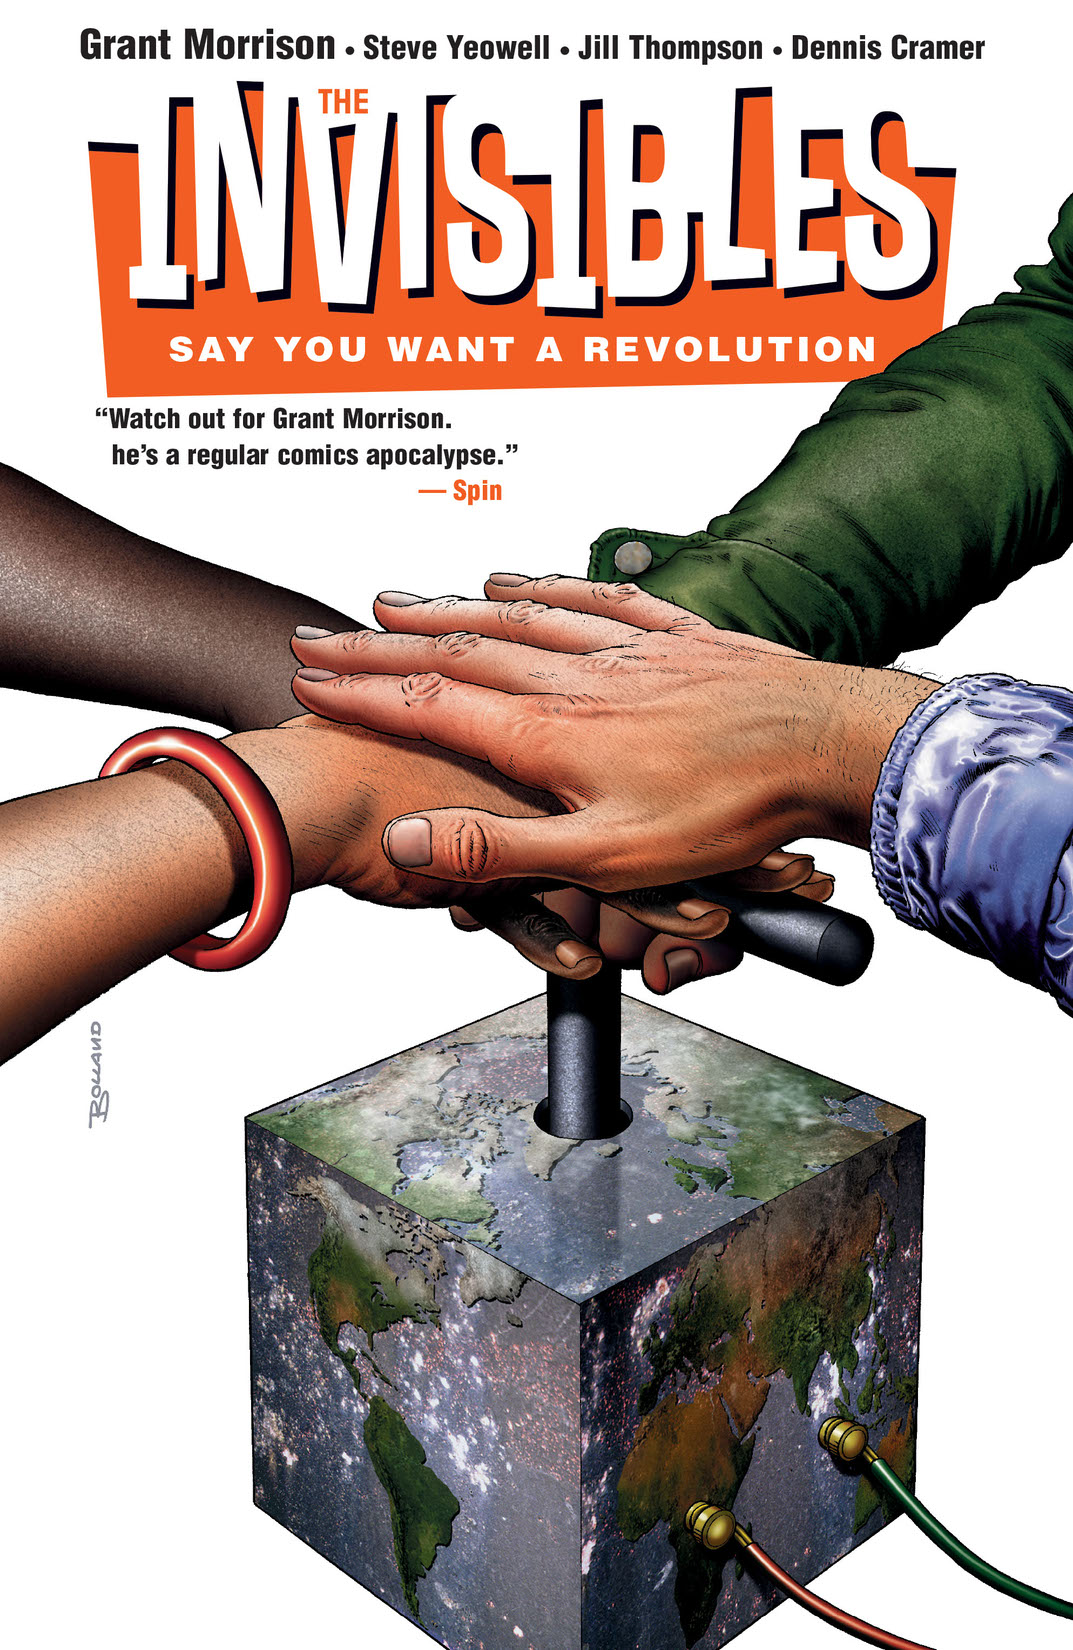 The Invisibles Vol. 1: Say You Want a Revolution preview images